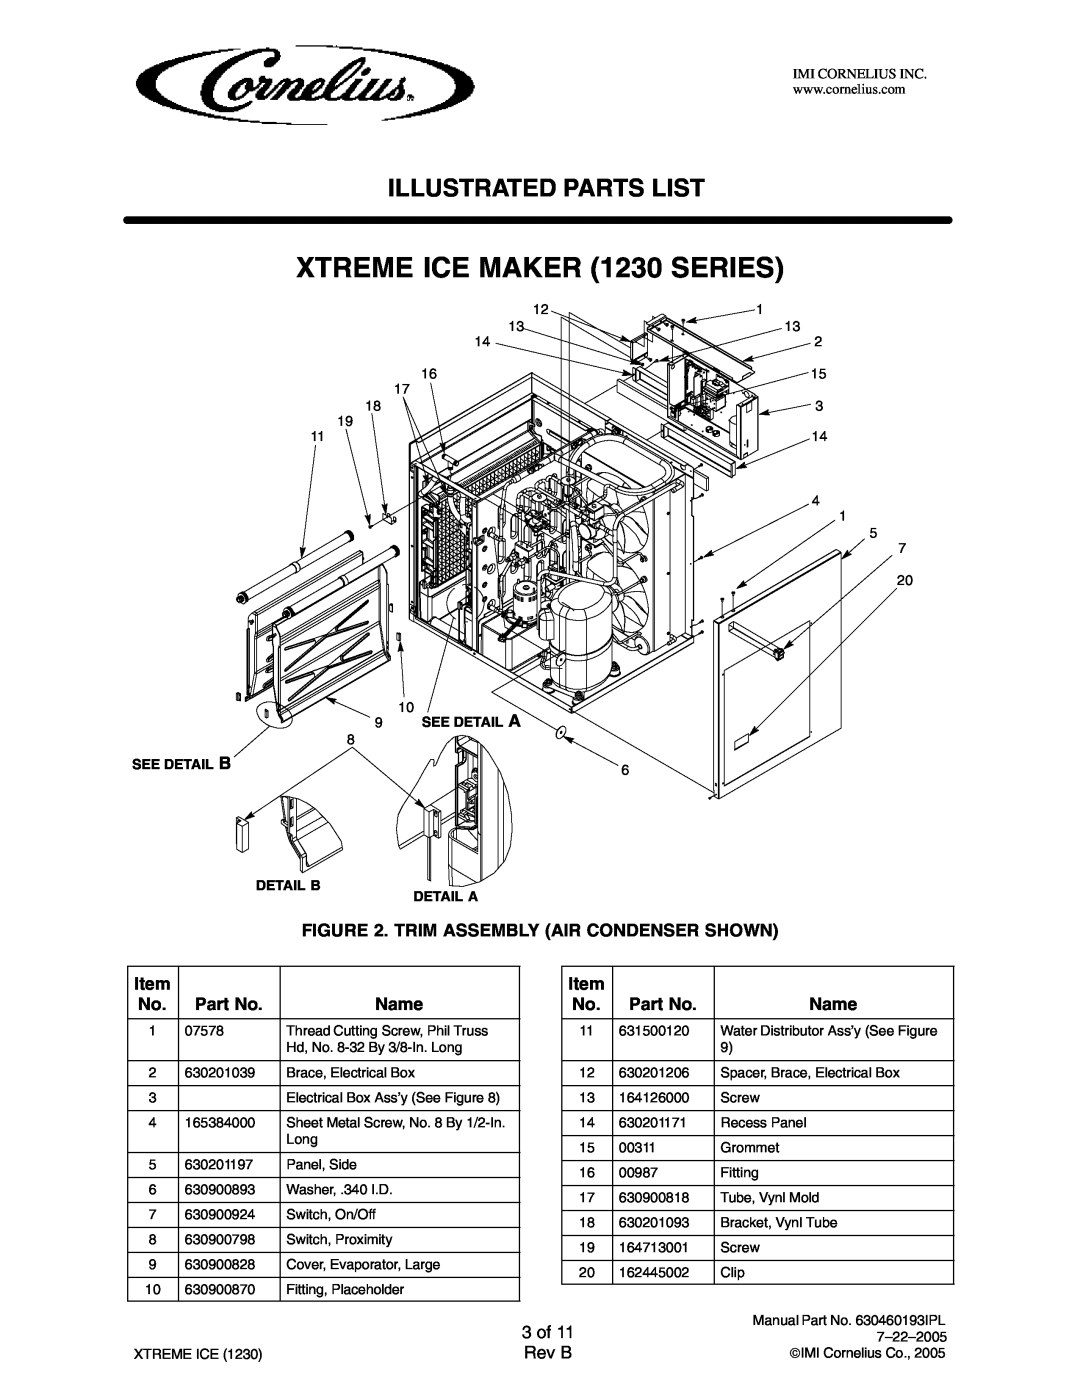 Cornelius 631812003 manual 3 of, XTREME ICE MAKER 1230 SERIES, Illustrated Parts List, Rev B, See Detail A, See Detail B 